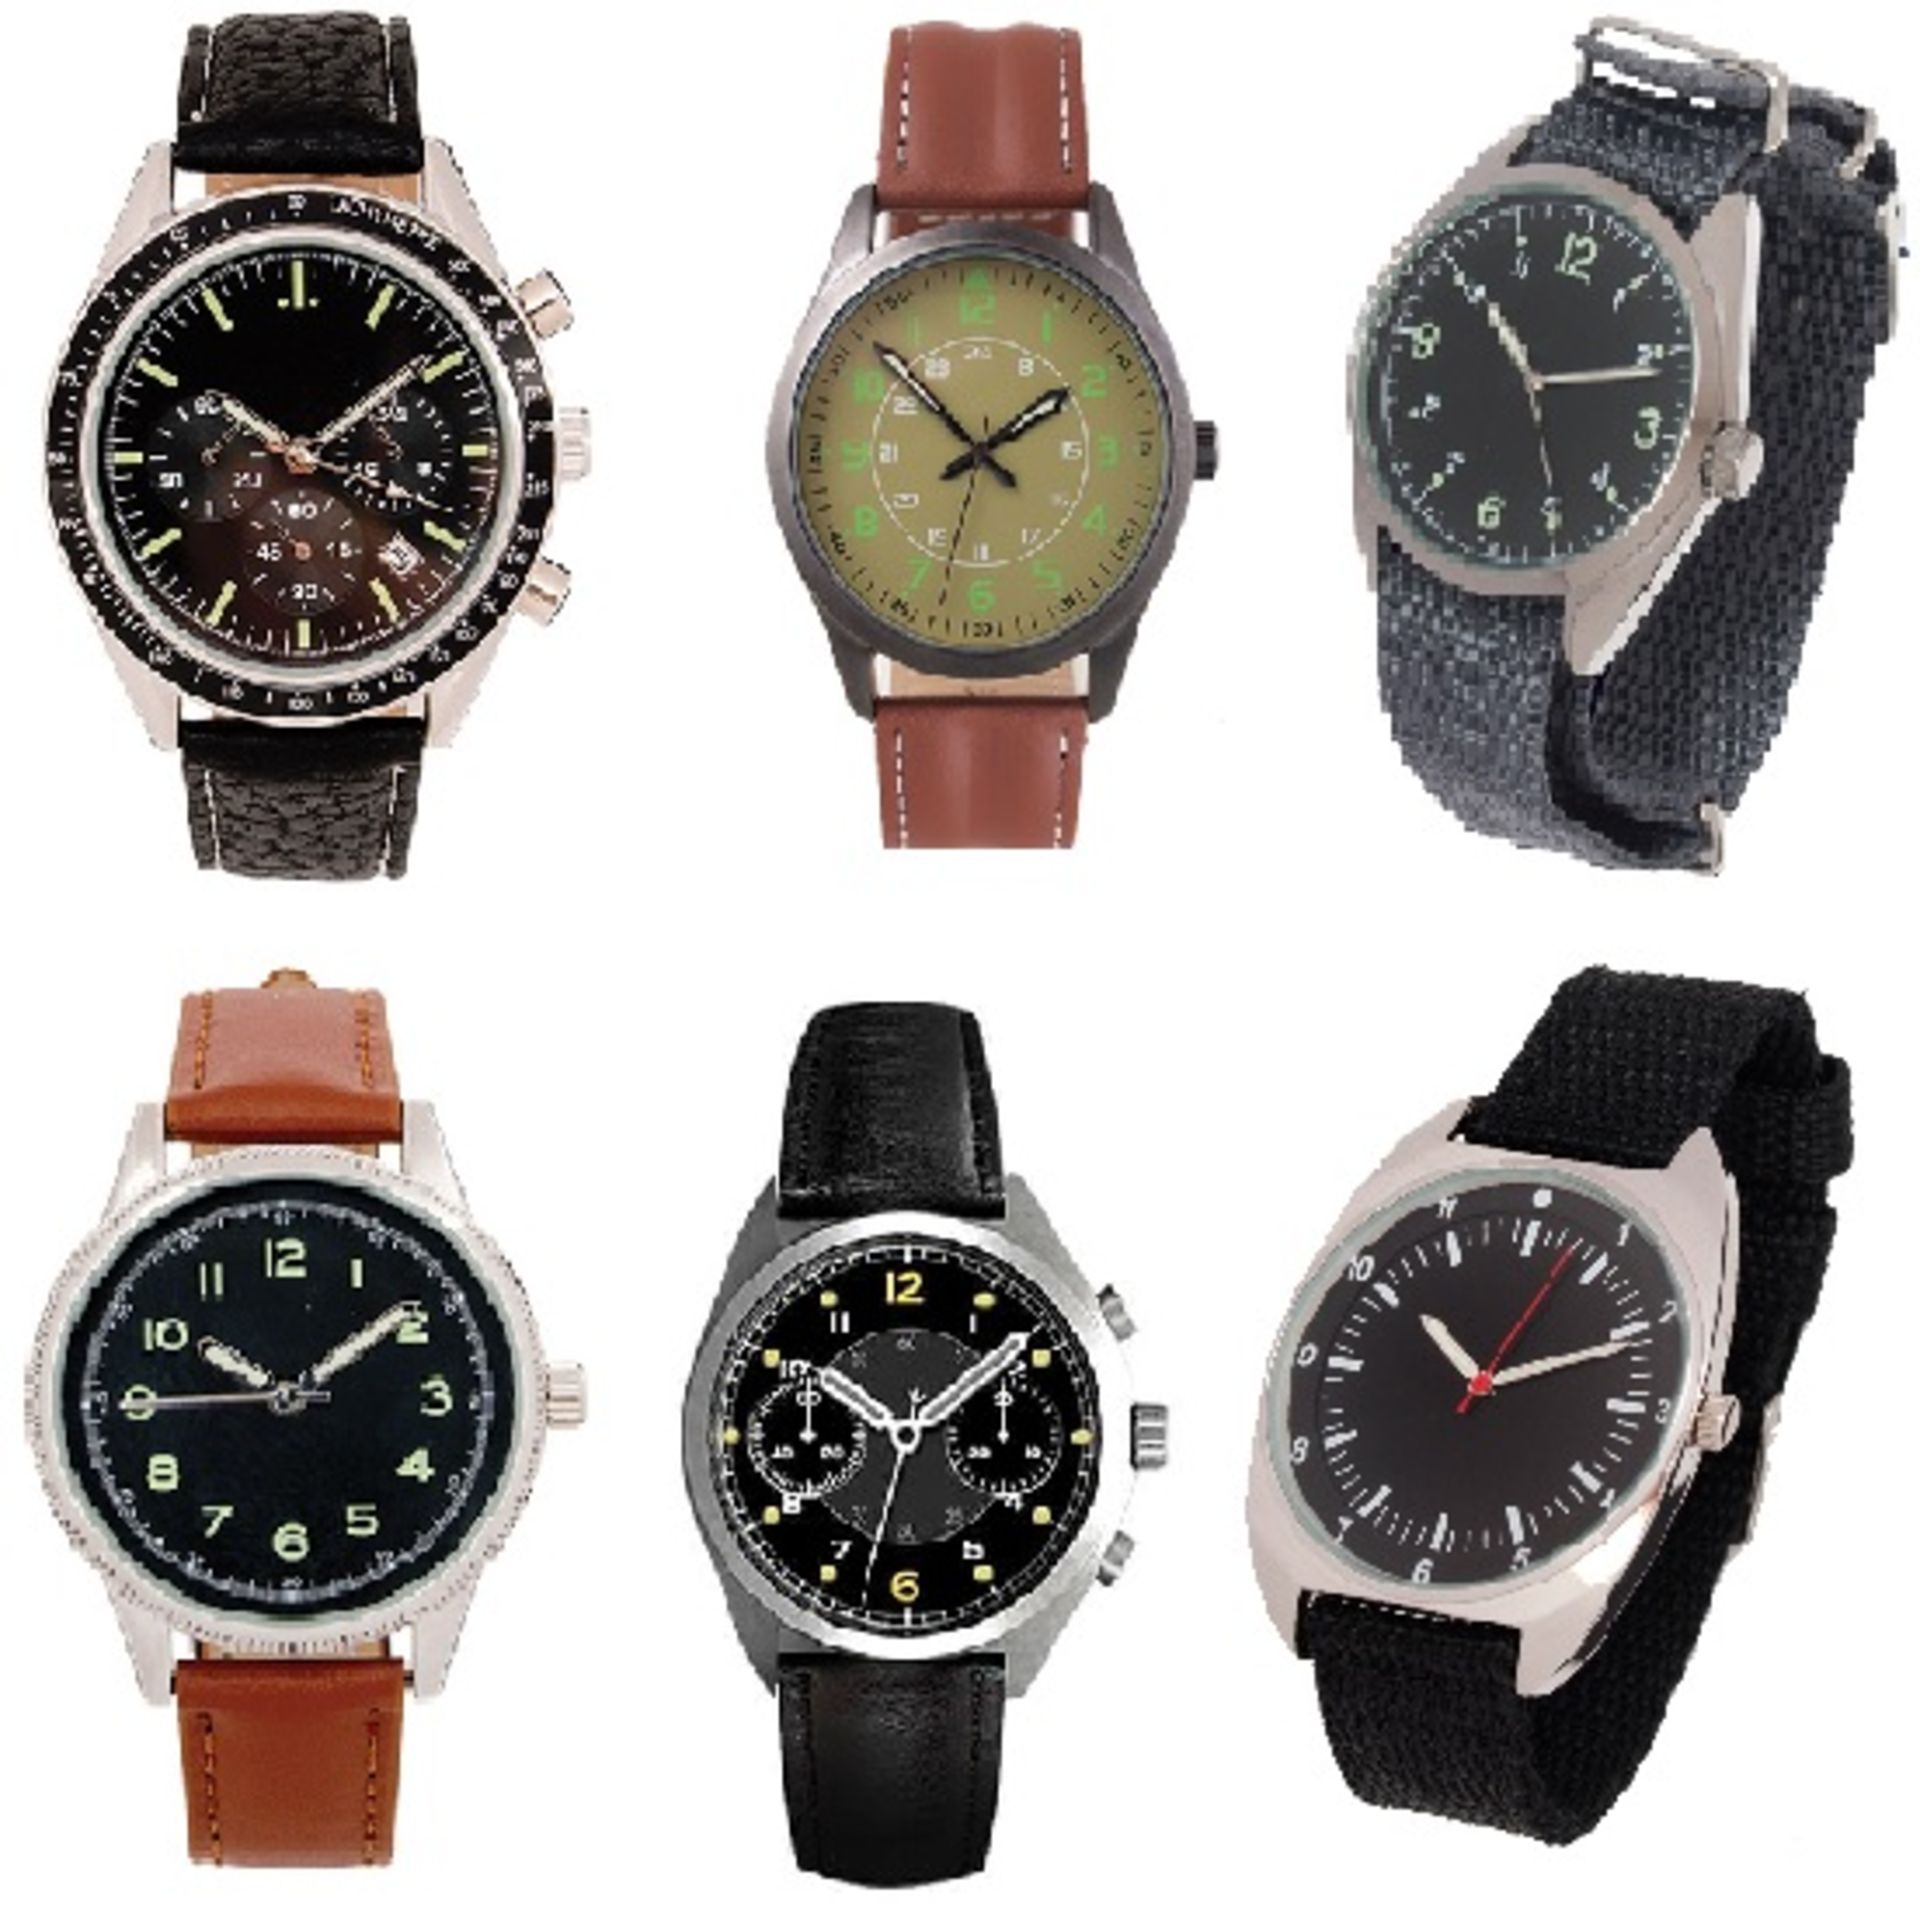 V Brand New A Lot Of Ten Various Military Style Watches - May Include US Army, German, British,